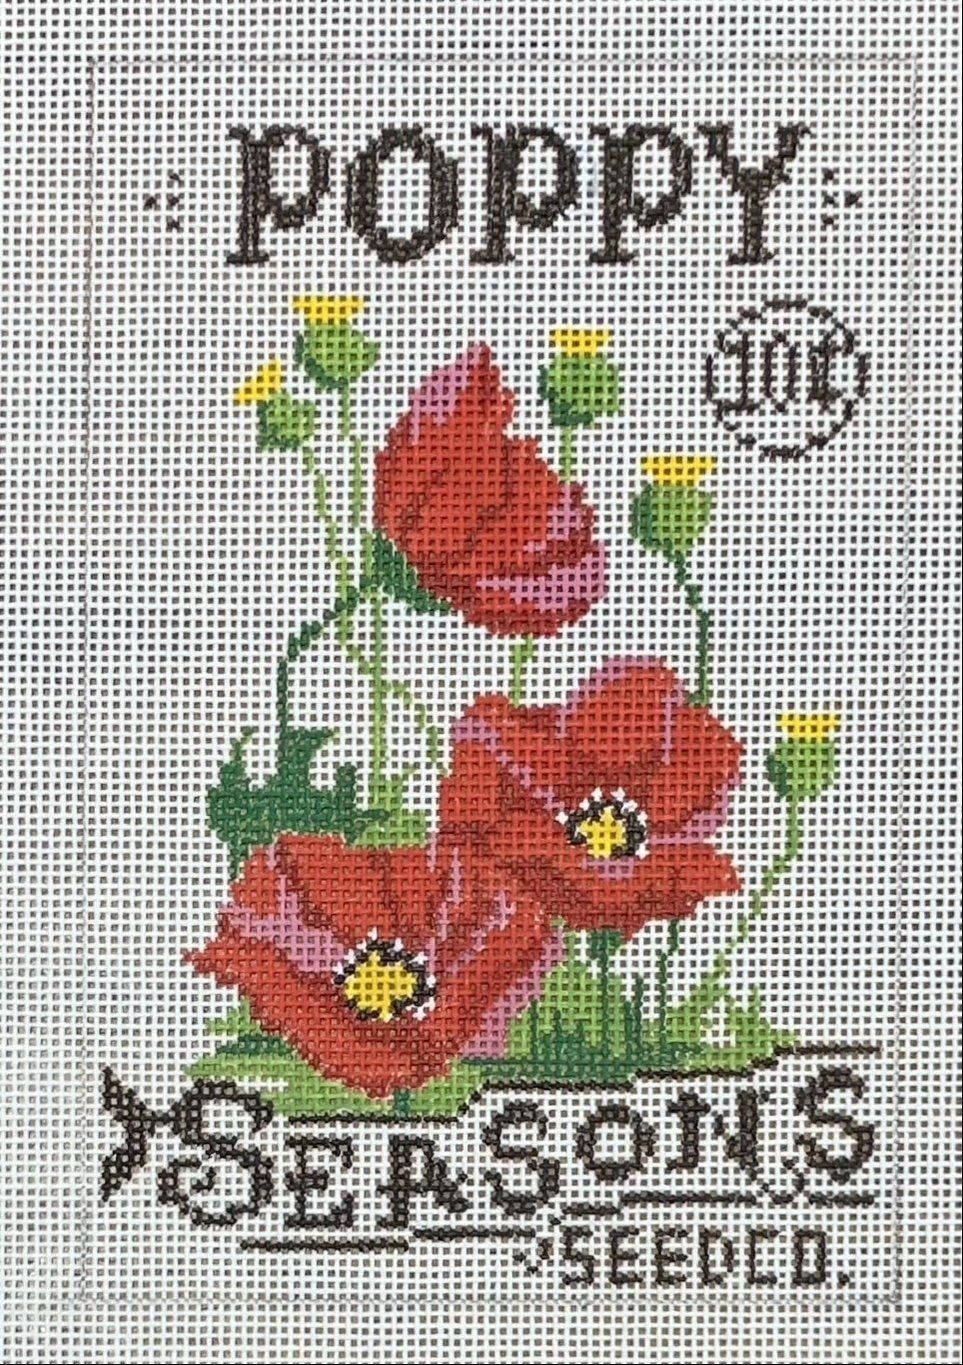 Seed Packet: Poppy